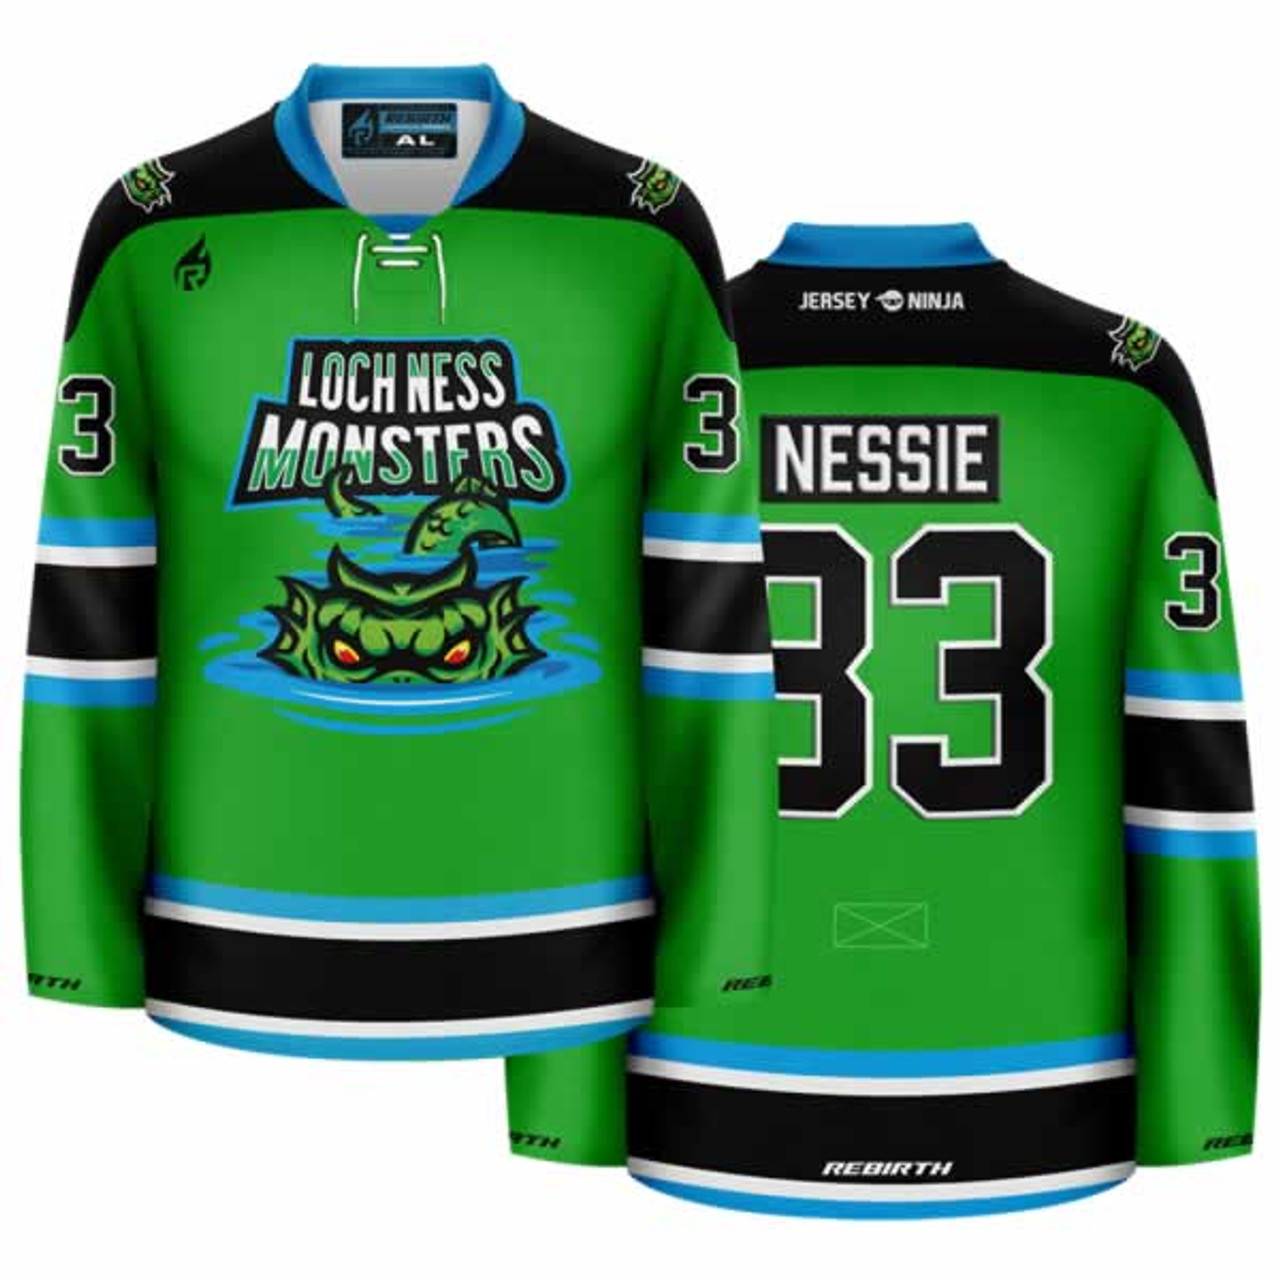 Loch Ness Jersey and Socks (Rental) — Mchl (Mythical Creatures Hockey League)